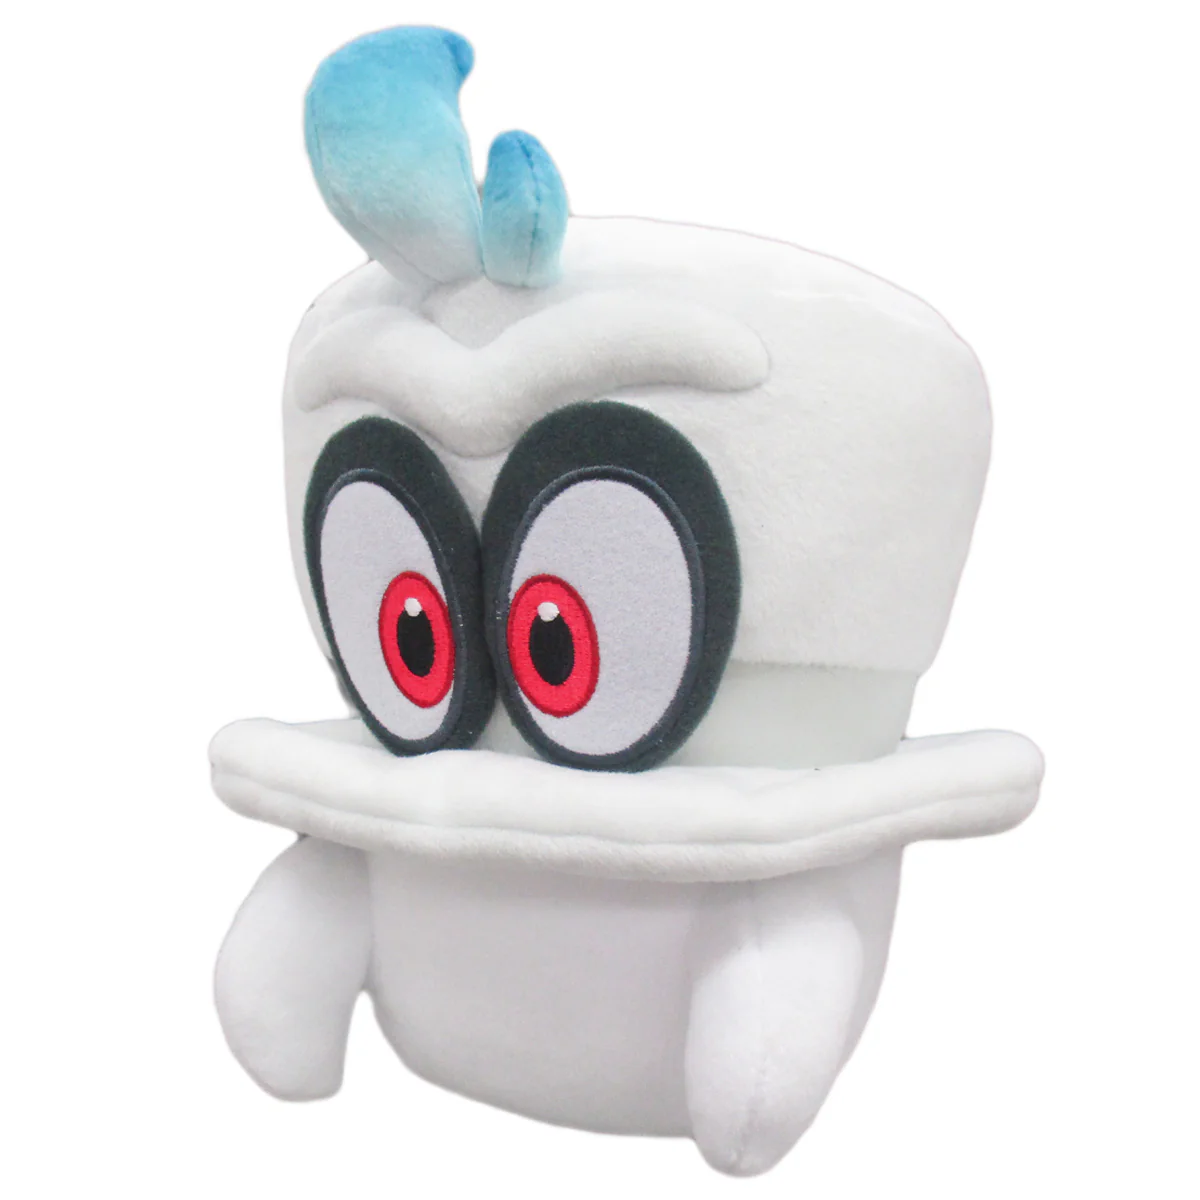 Little Buddy - 7.5" Cappy Normal Form Plush (A09)